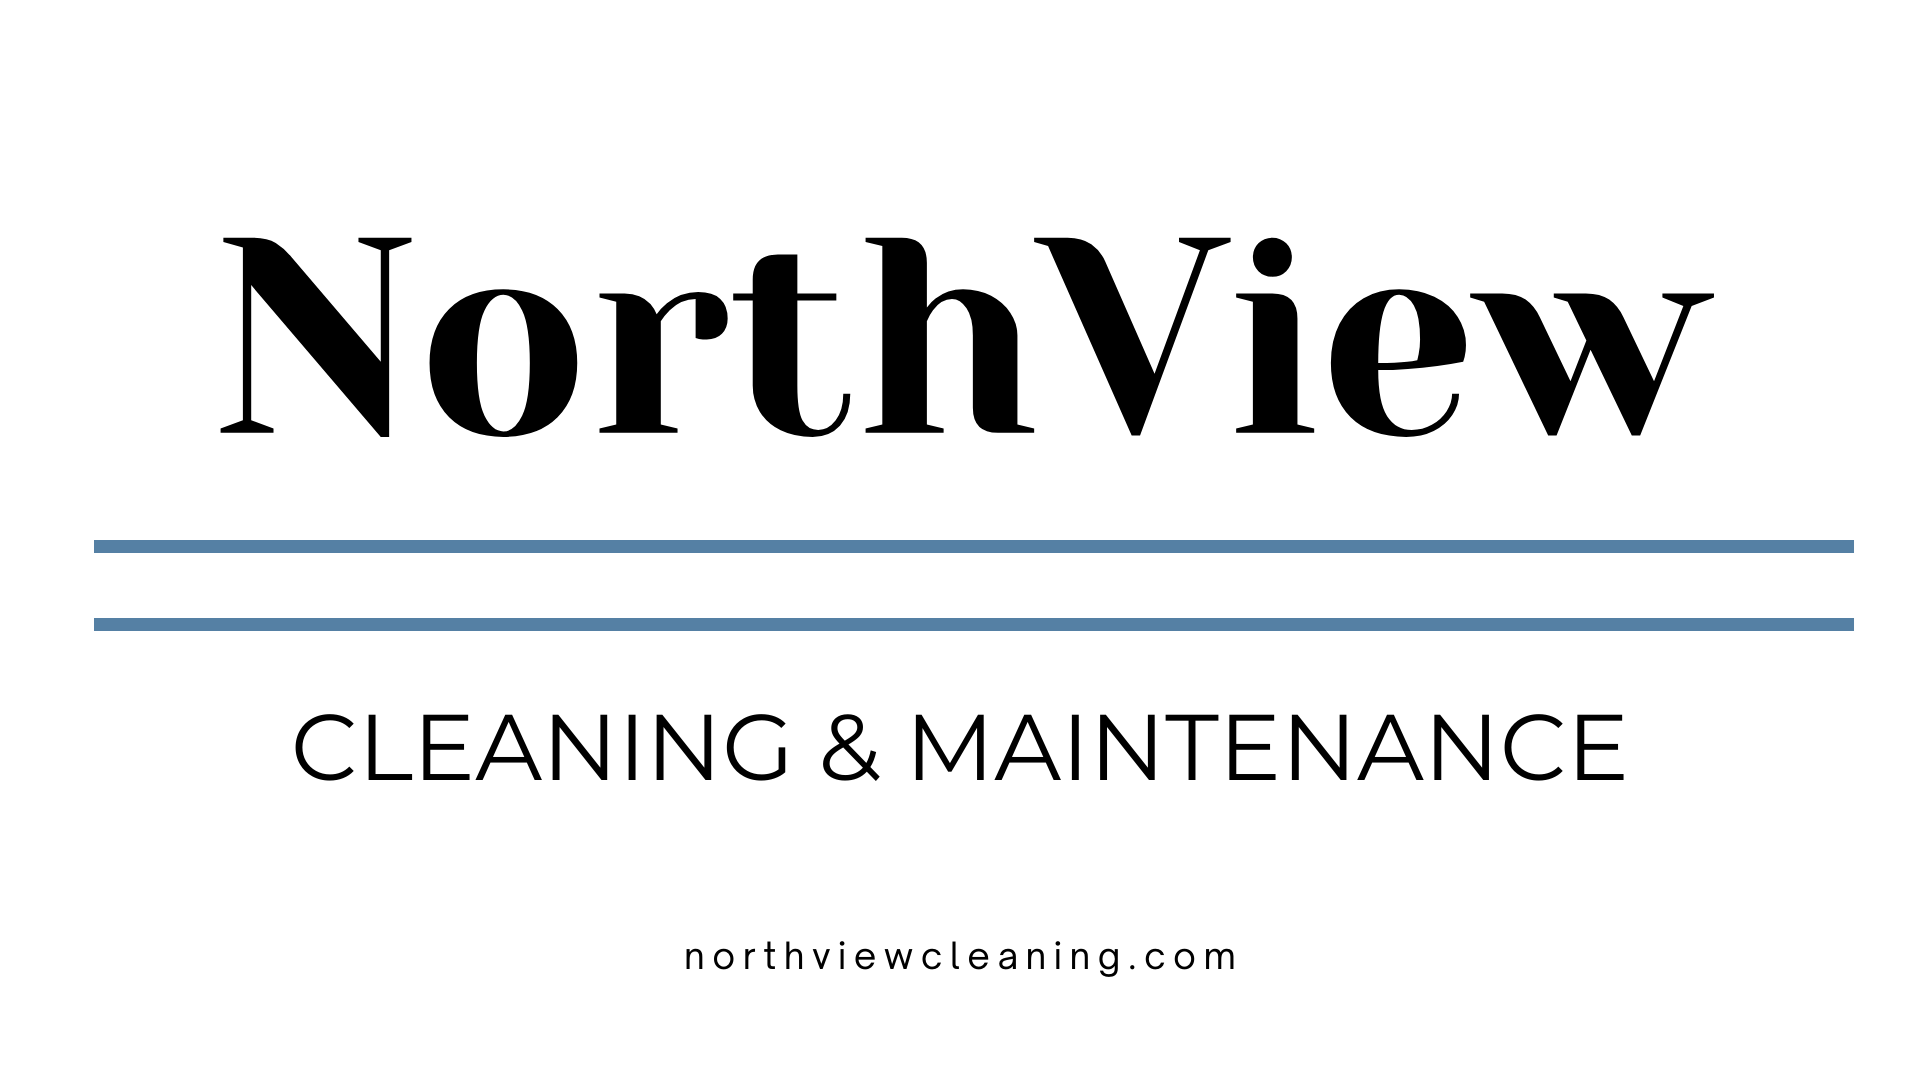 NorthView Cleaning & Maintenance Logo